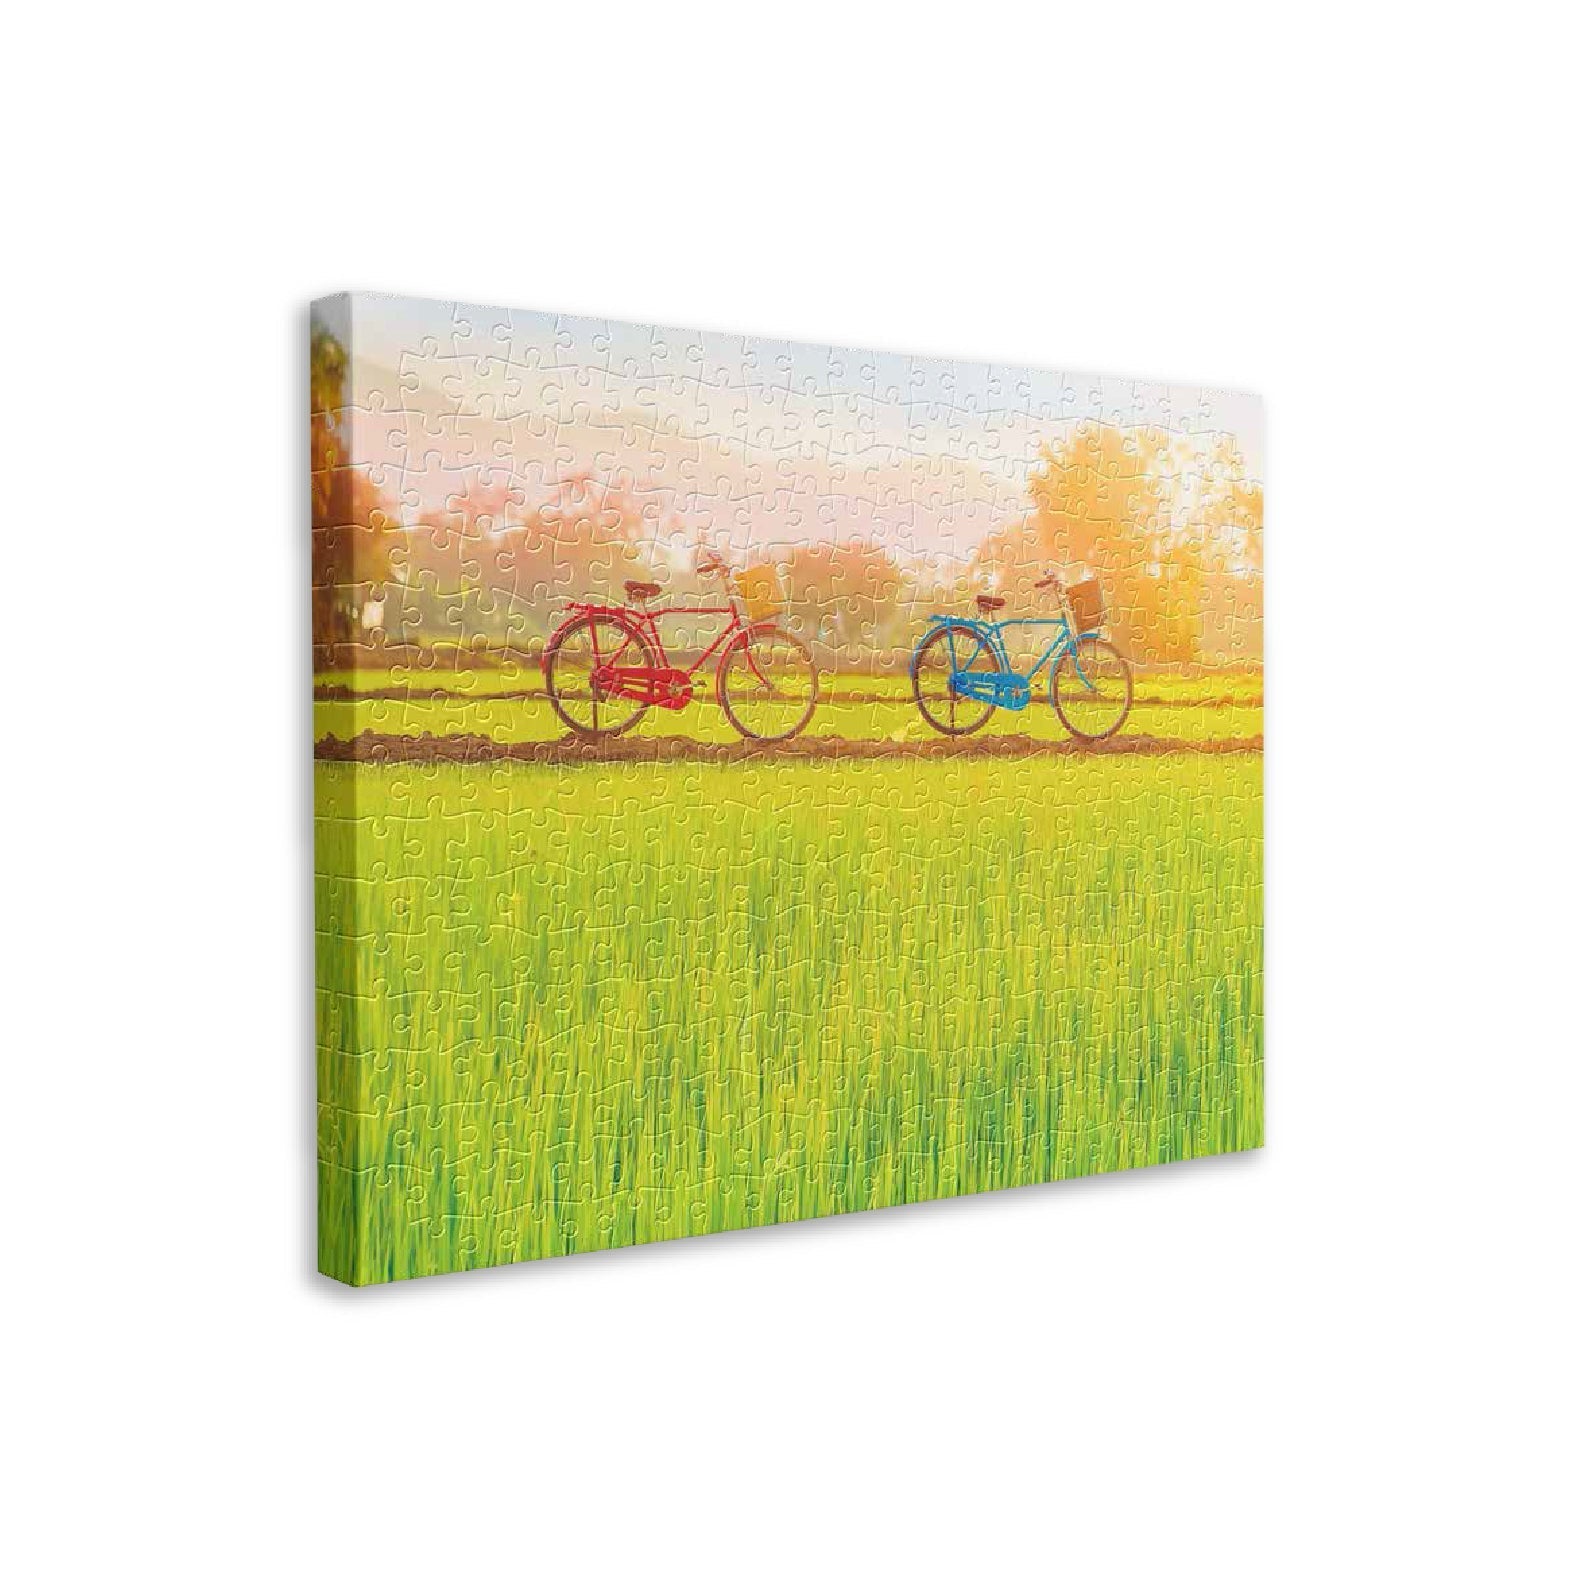 Away from the City - Sun-kissed Green Fields - 366 Piece Jigsaw Puzzle